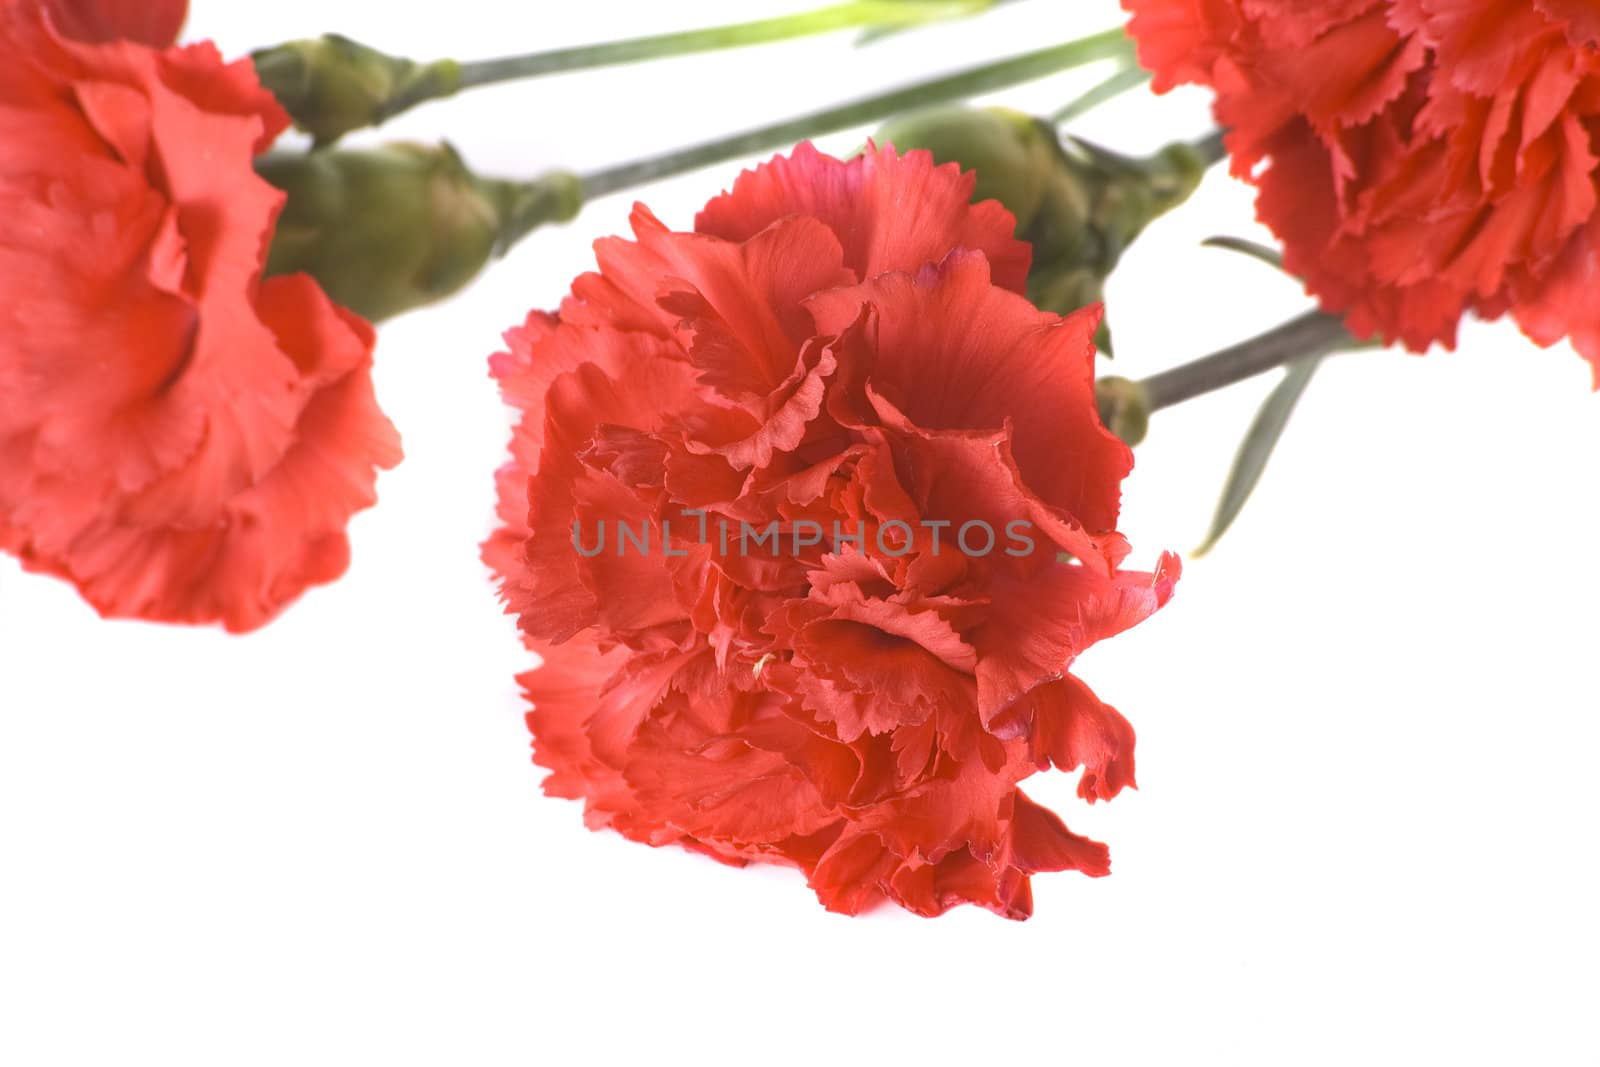 Red carnations by Dan70